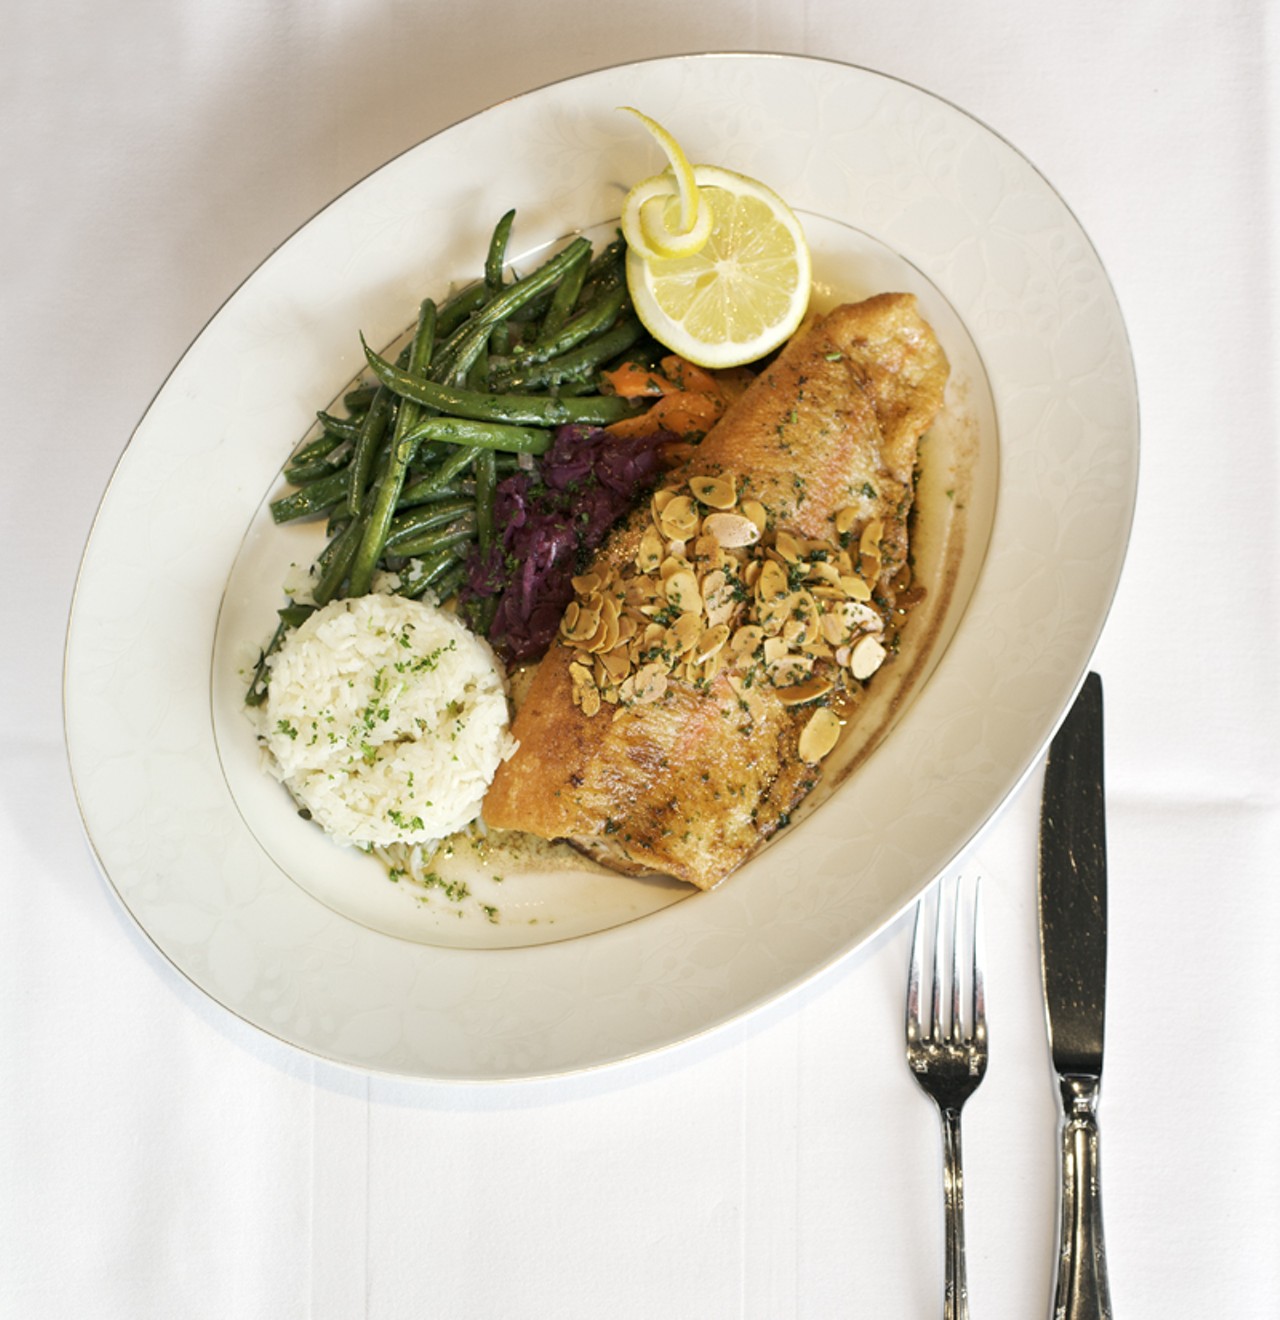 Truite &acirc;ux amandes is golden Idaho trout with haricots verts, braised red cabbage and rice pilaf.